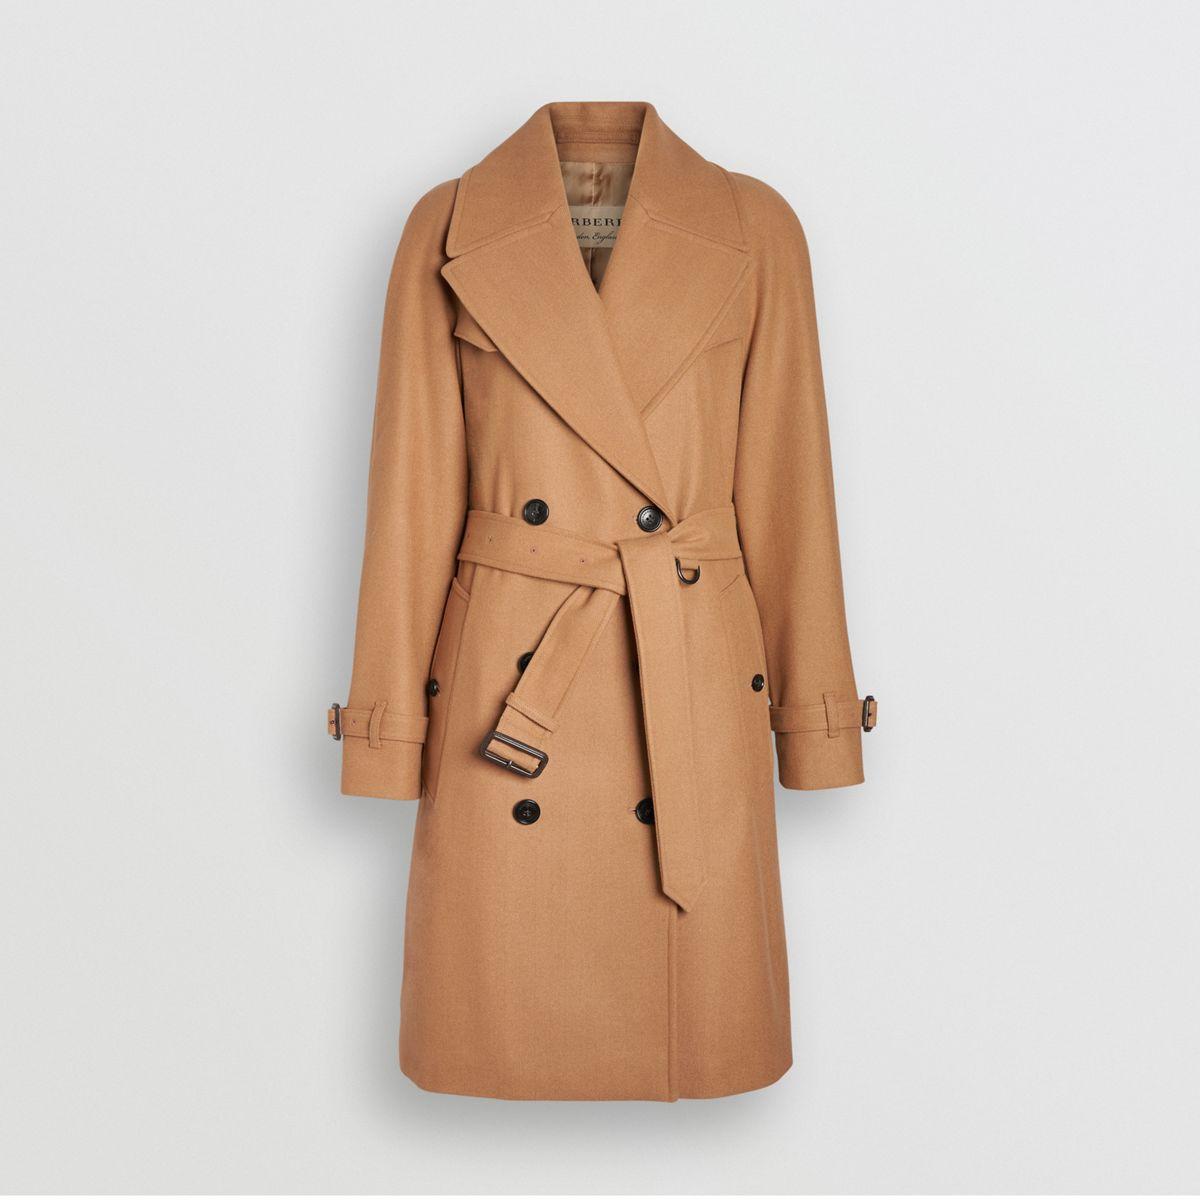 Burberry Cranston Trench Coat in Camel (Natural) - Lyst